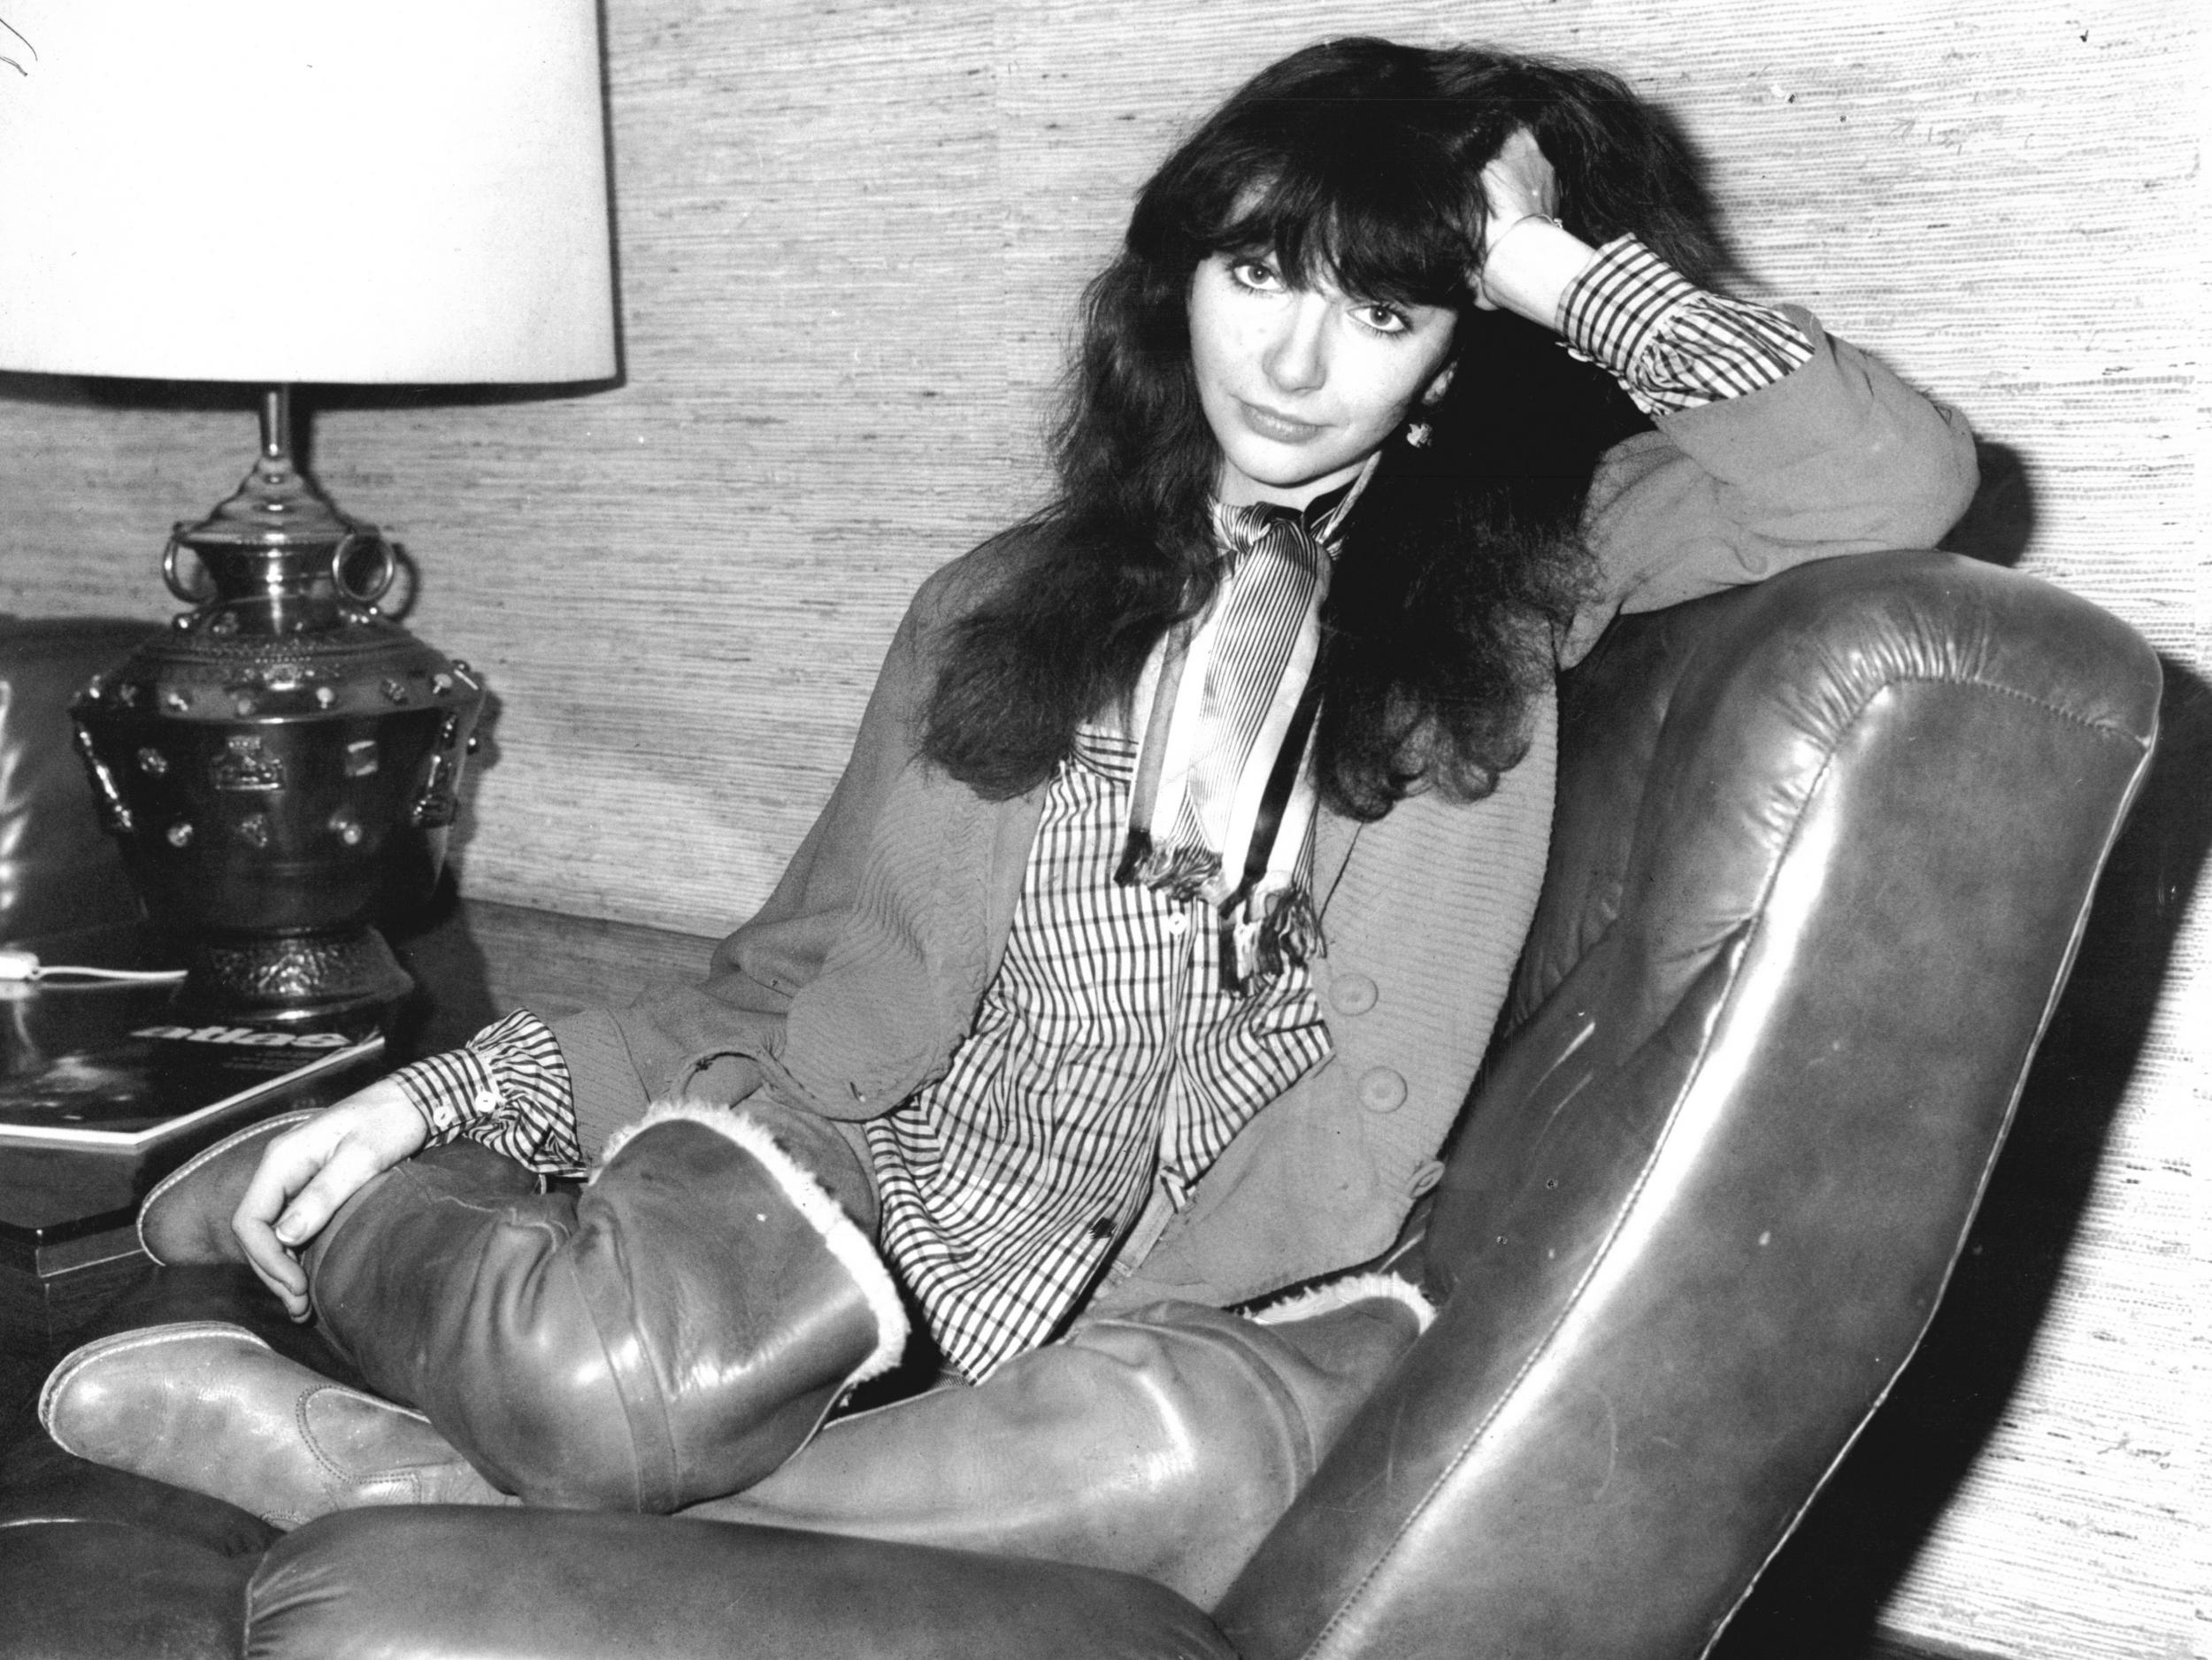 Kate Bush was 19 years old when ‘The Kick Inside’ was released